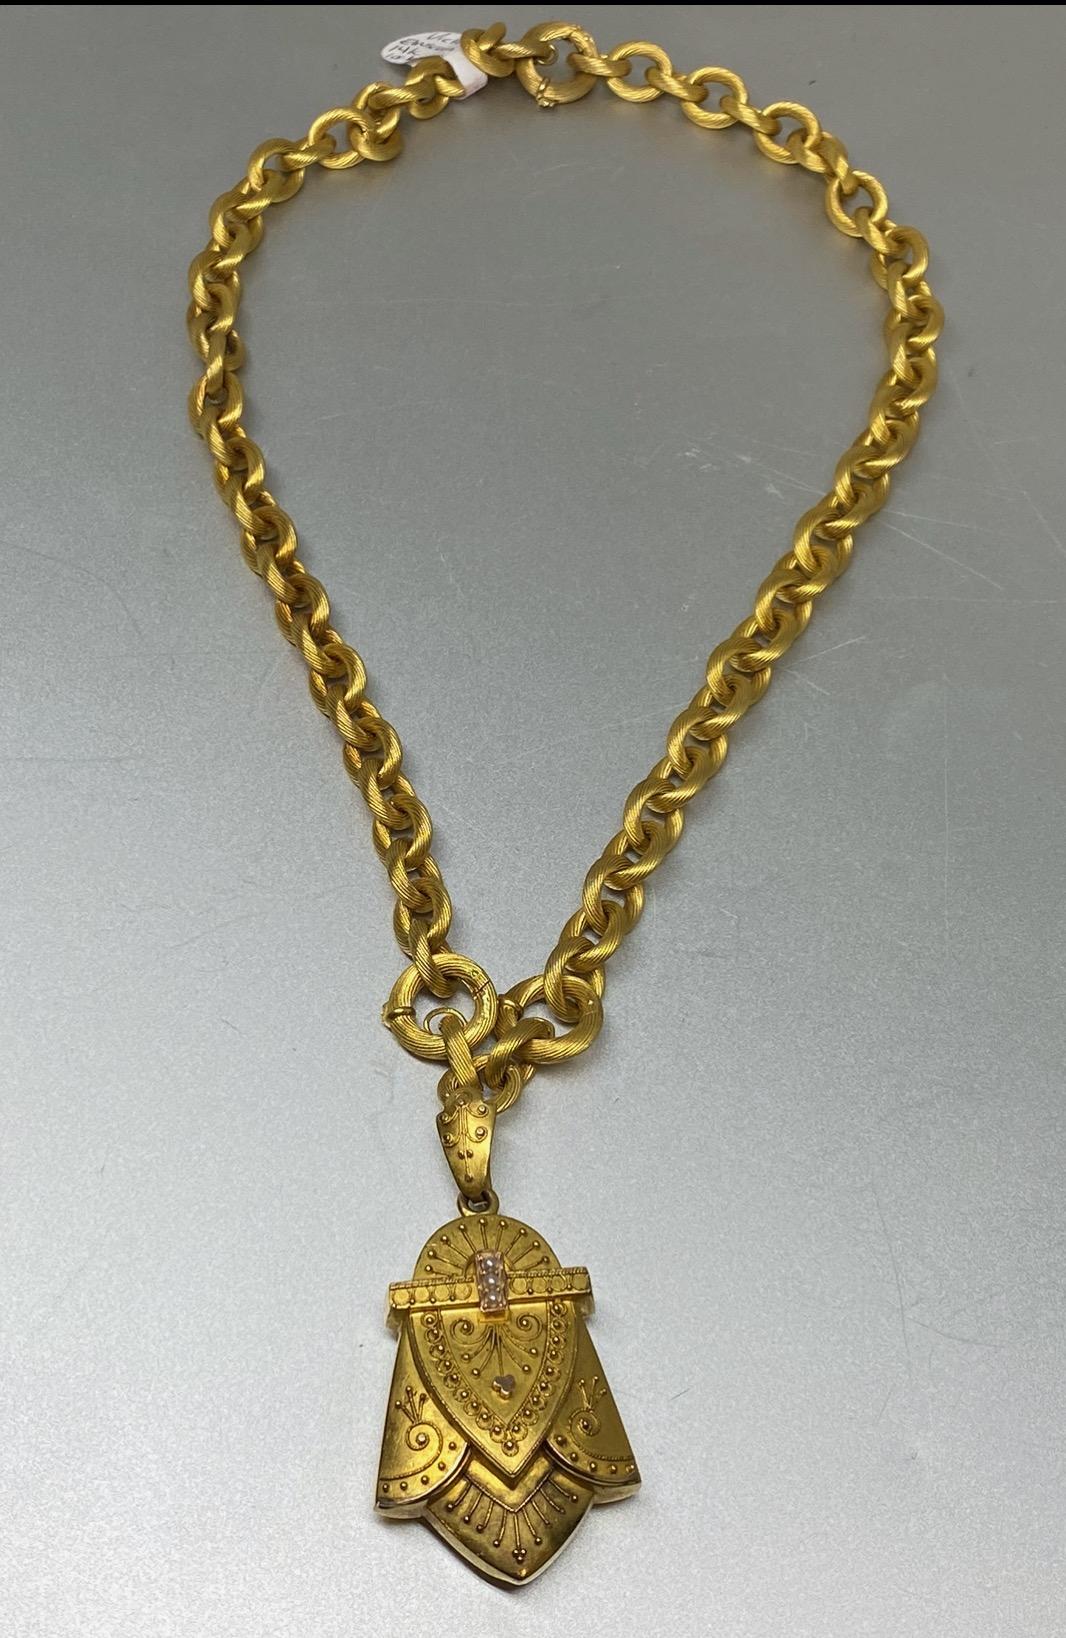 14k Yellow Gold Etruscan Revival Victorian Locket Pendant Chain Necklace In Good Condition For Sale In Bernardsville, NJ